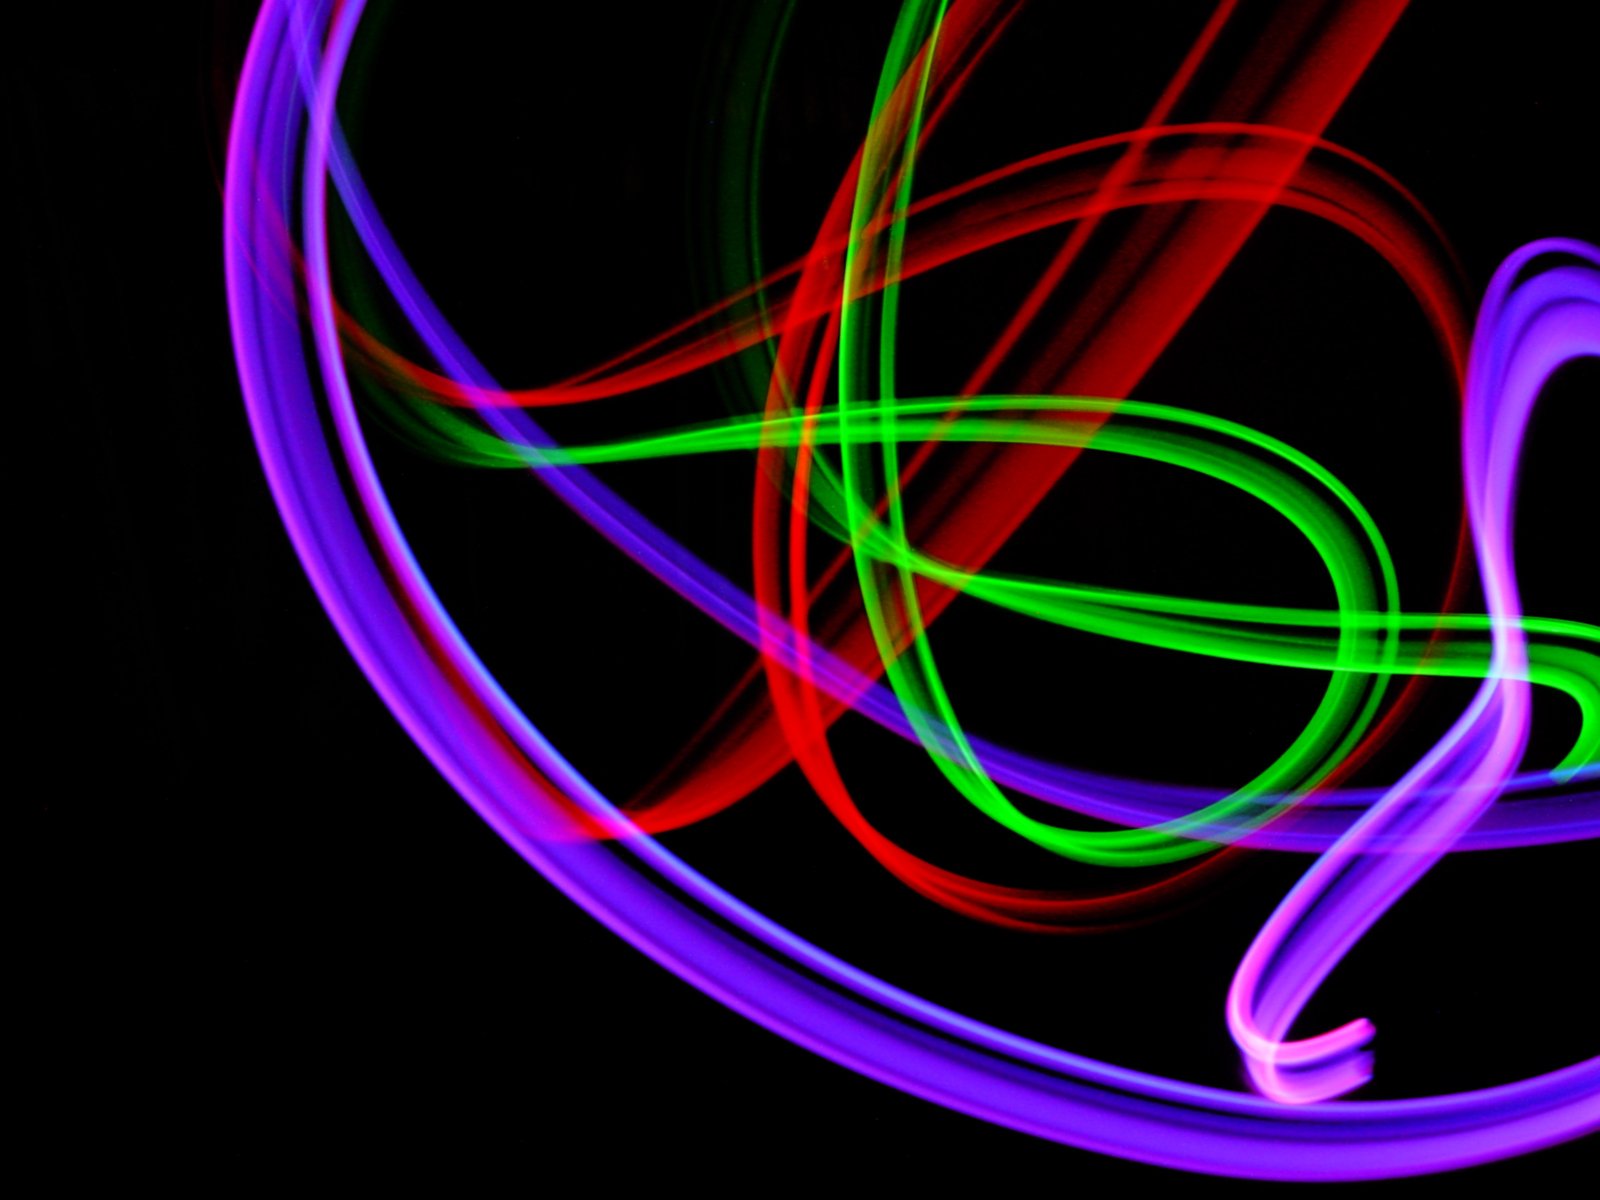 a colorful neon po of swirling ribbons against black